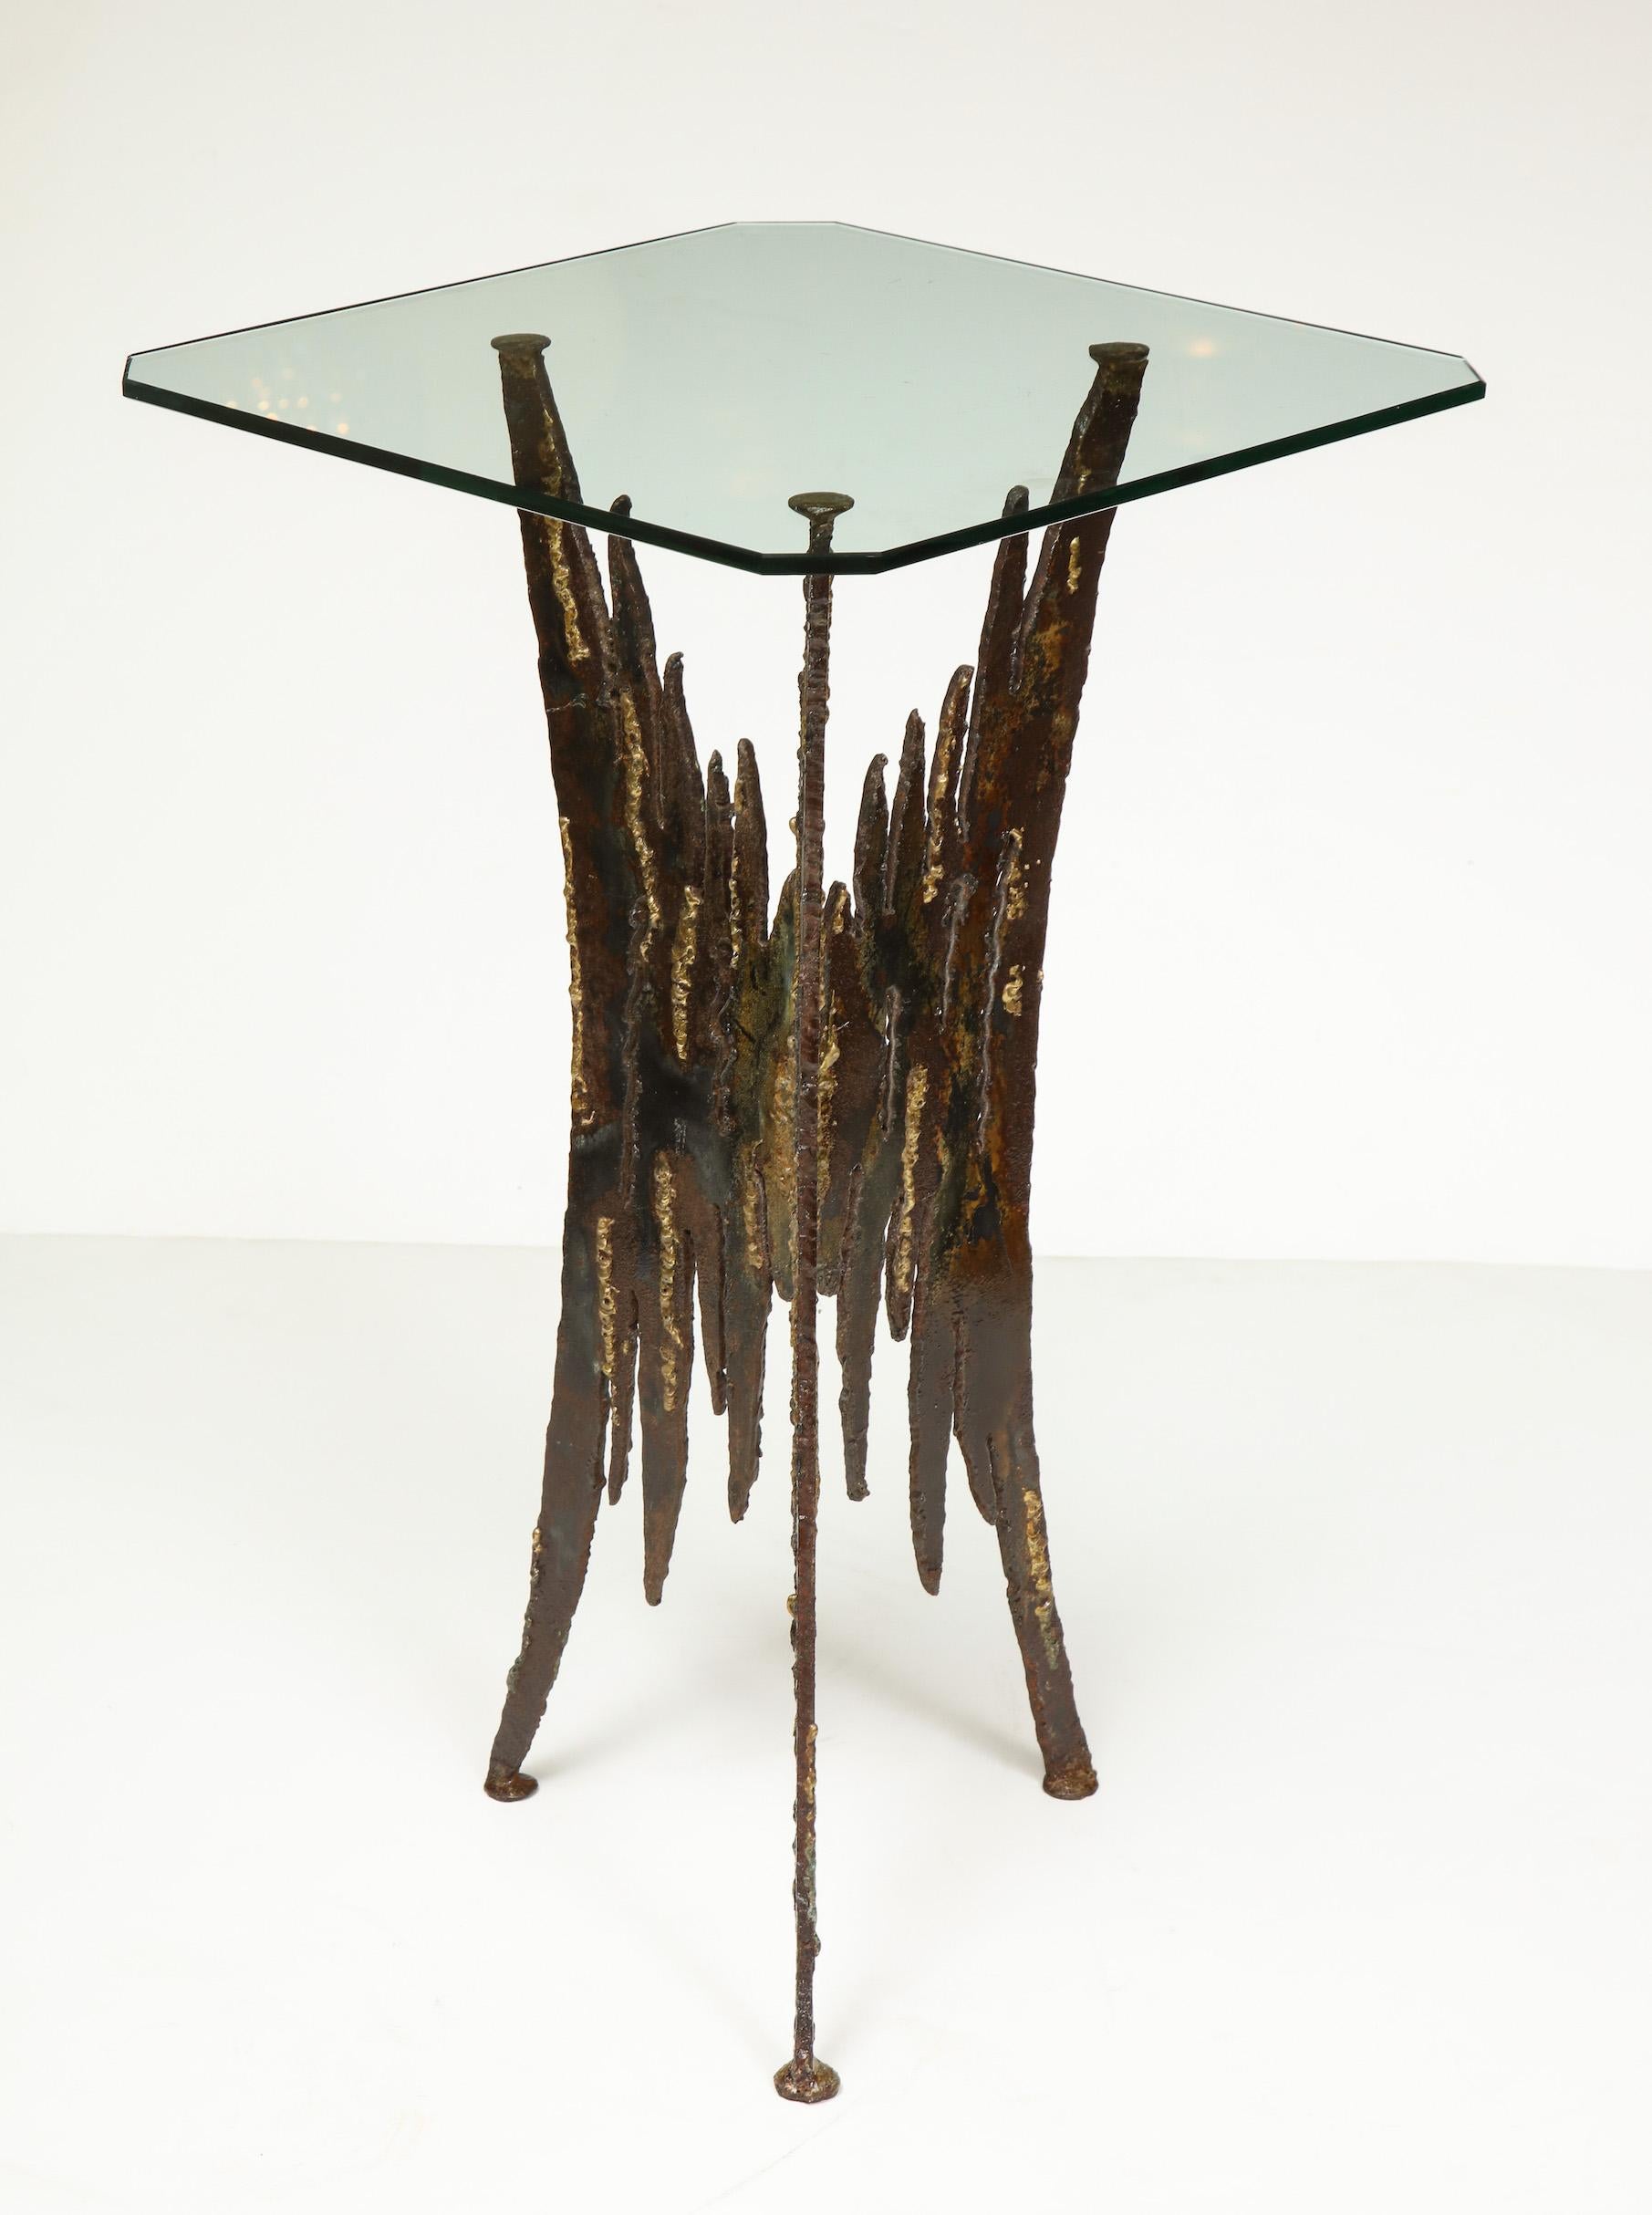 Welded Brutalist Side Table Attributed to Silas Seandel